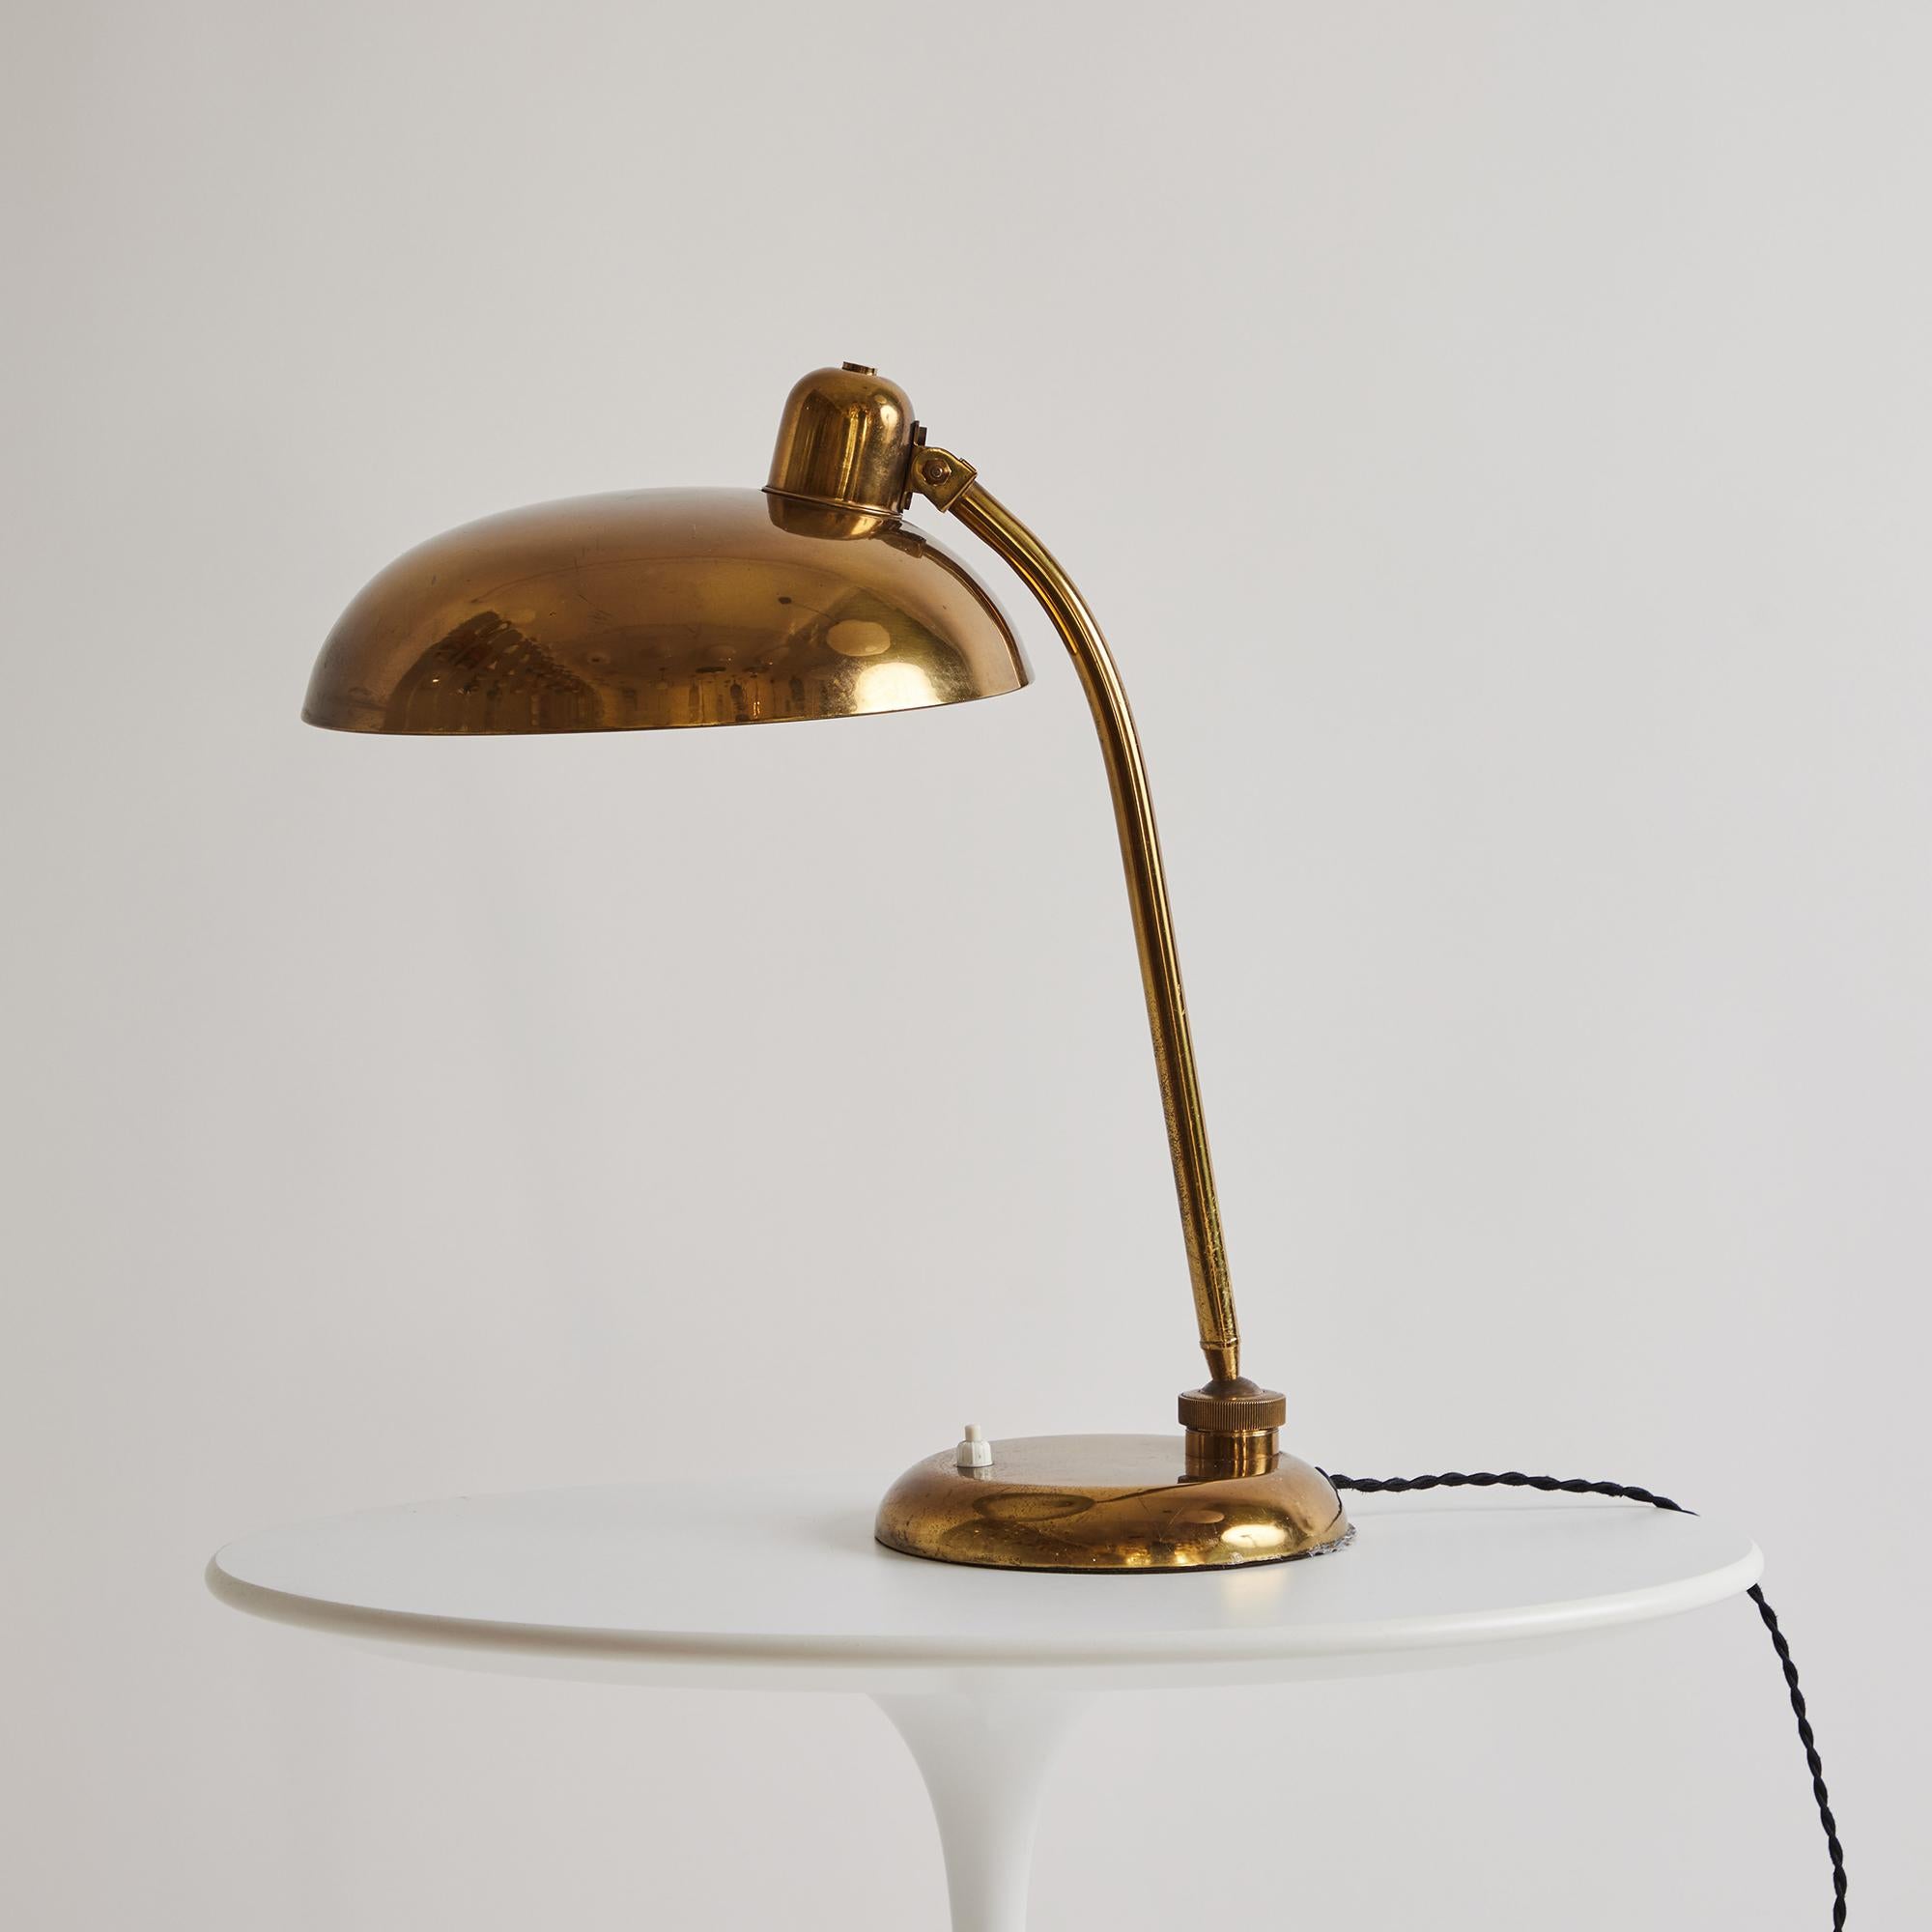 Italian 1940s Giovanni Michelucci Patinated Brass Ministerial Table Lamp for Lariolux For Sale